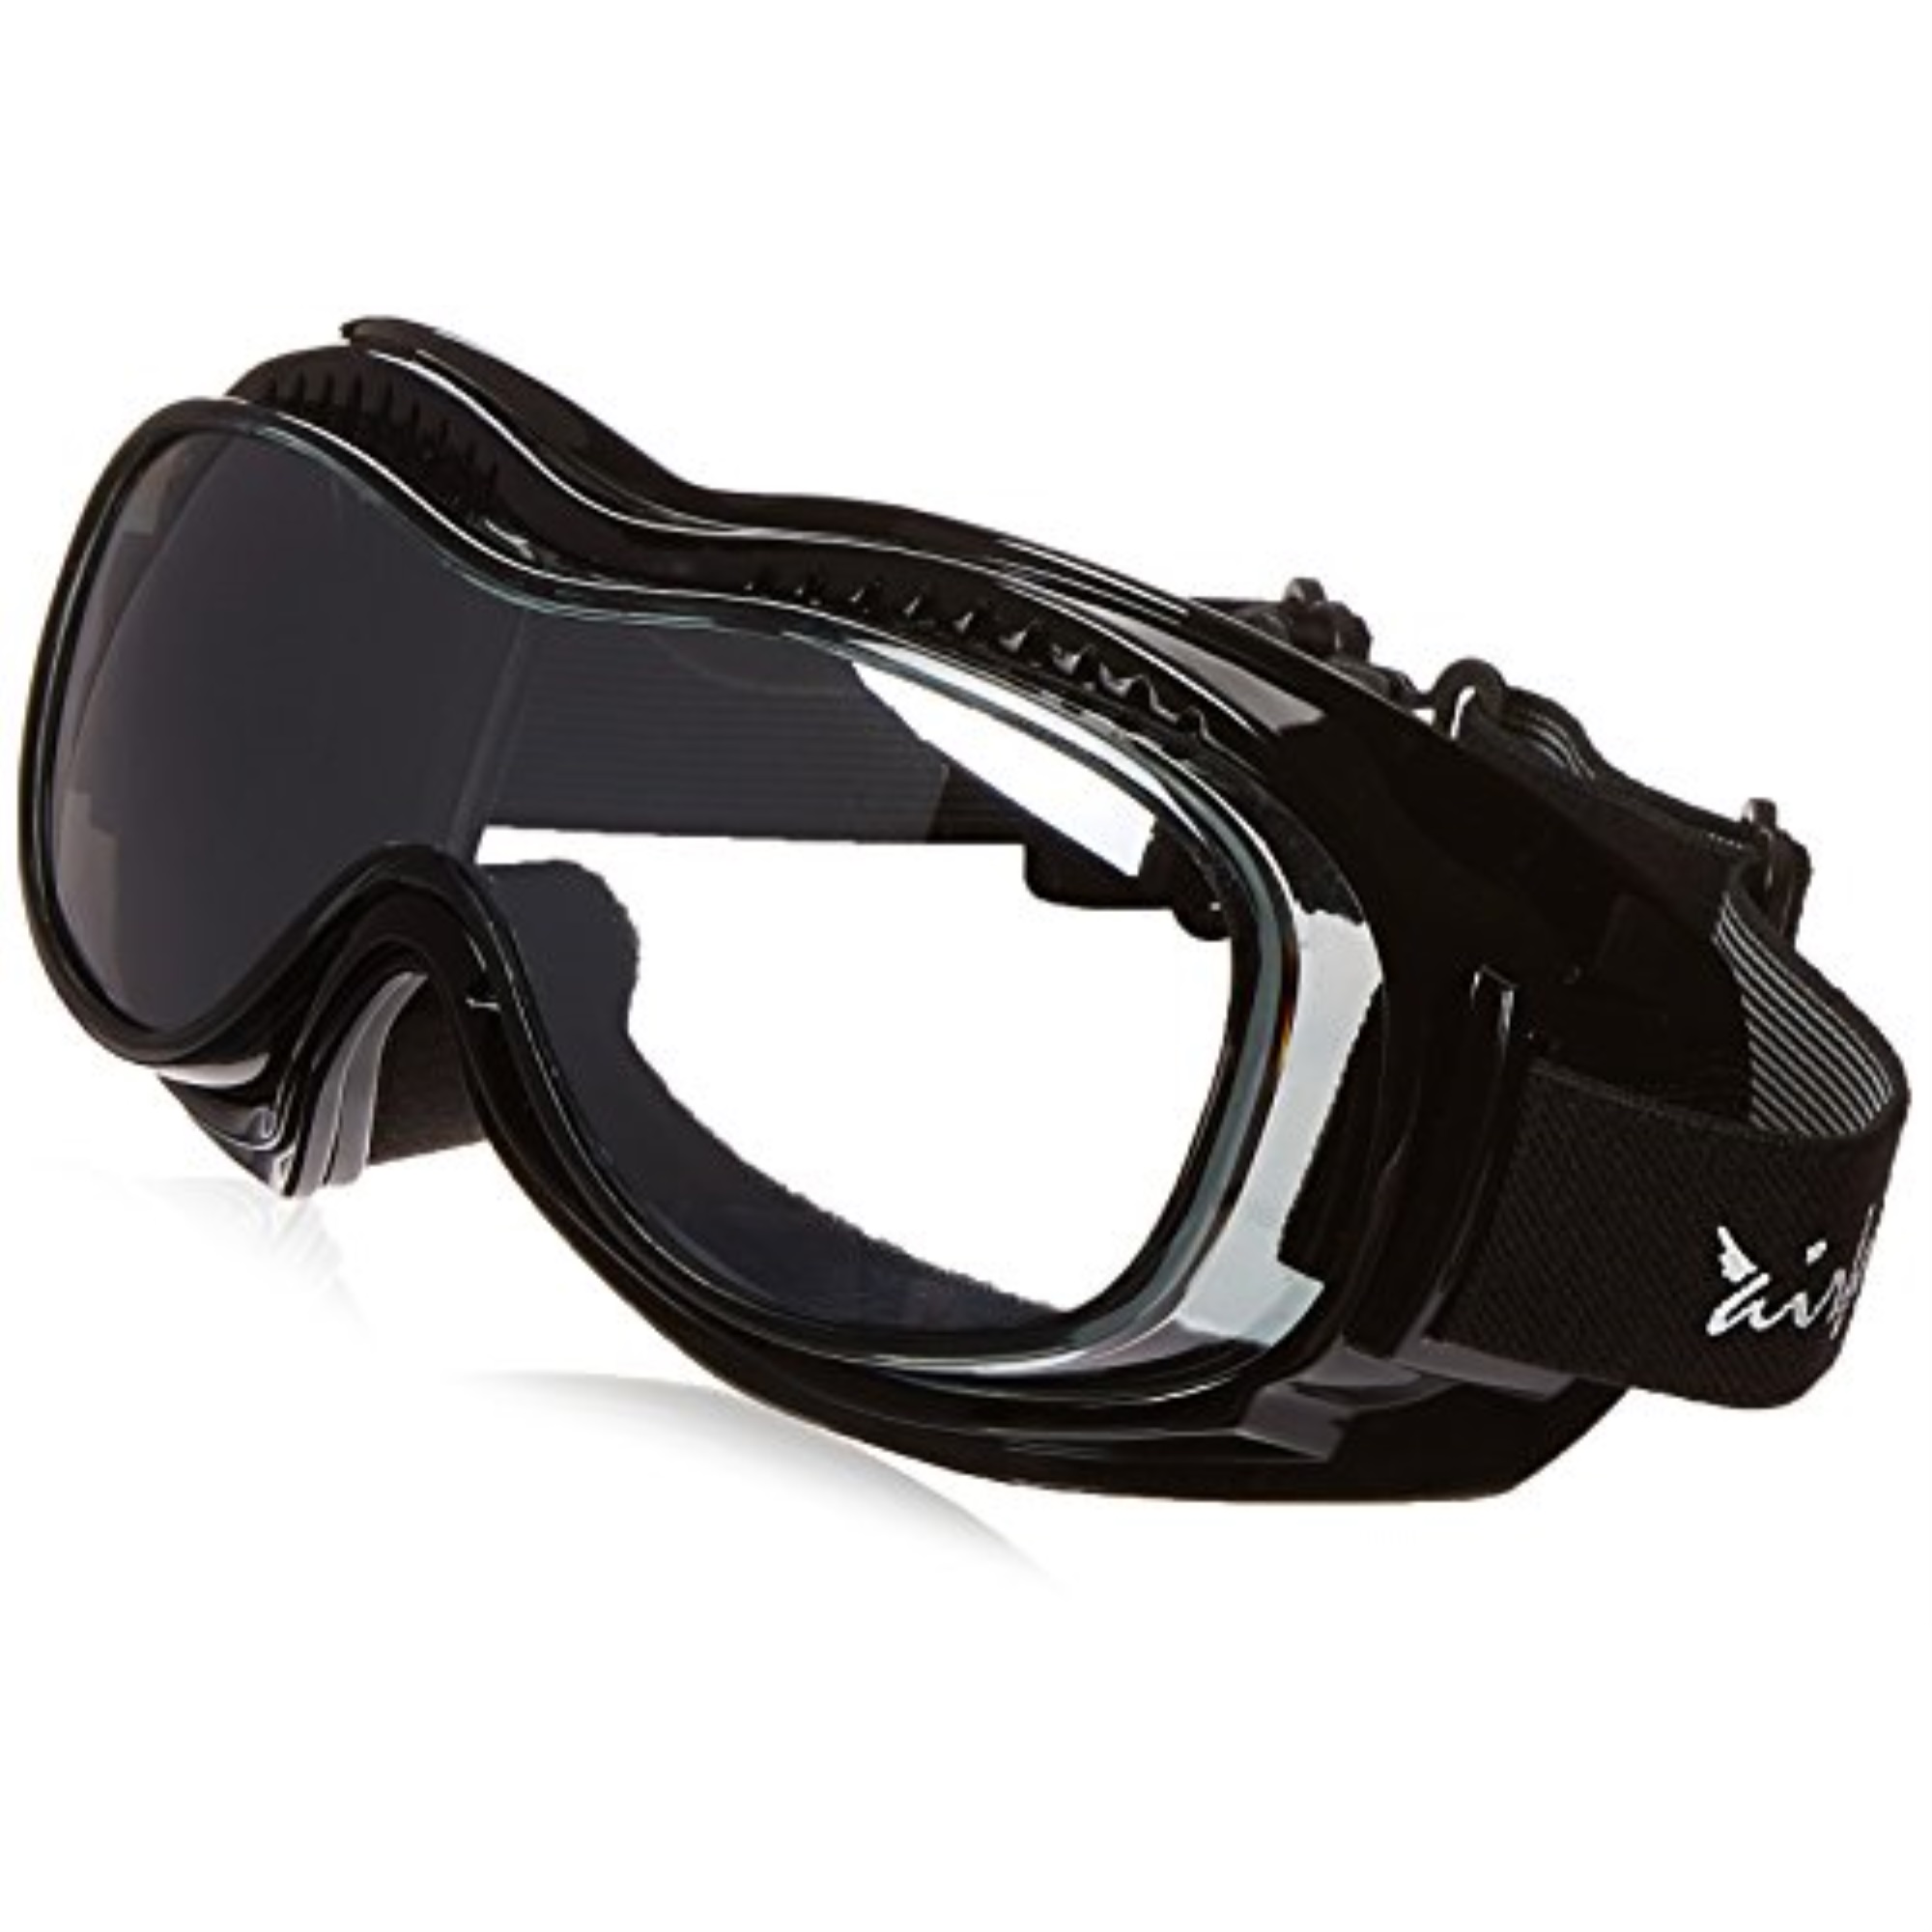 Pacific Coast Feather Pacific Coast Feathe Pacific Coast Airfoil Padded Fit Over Glasses Riding Goggles (Black Frame/Silver Smoke Lens)